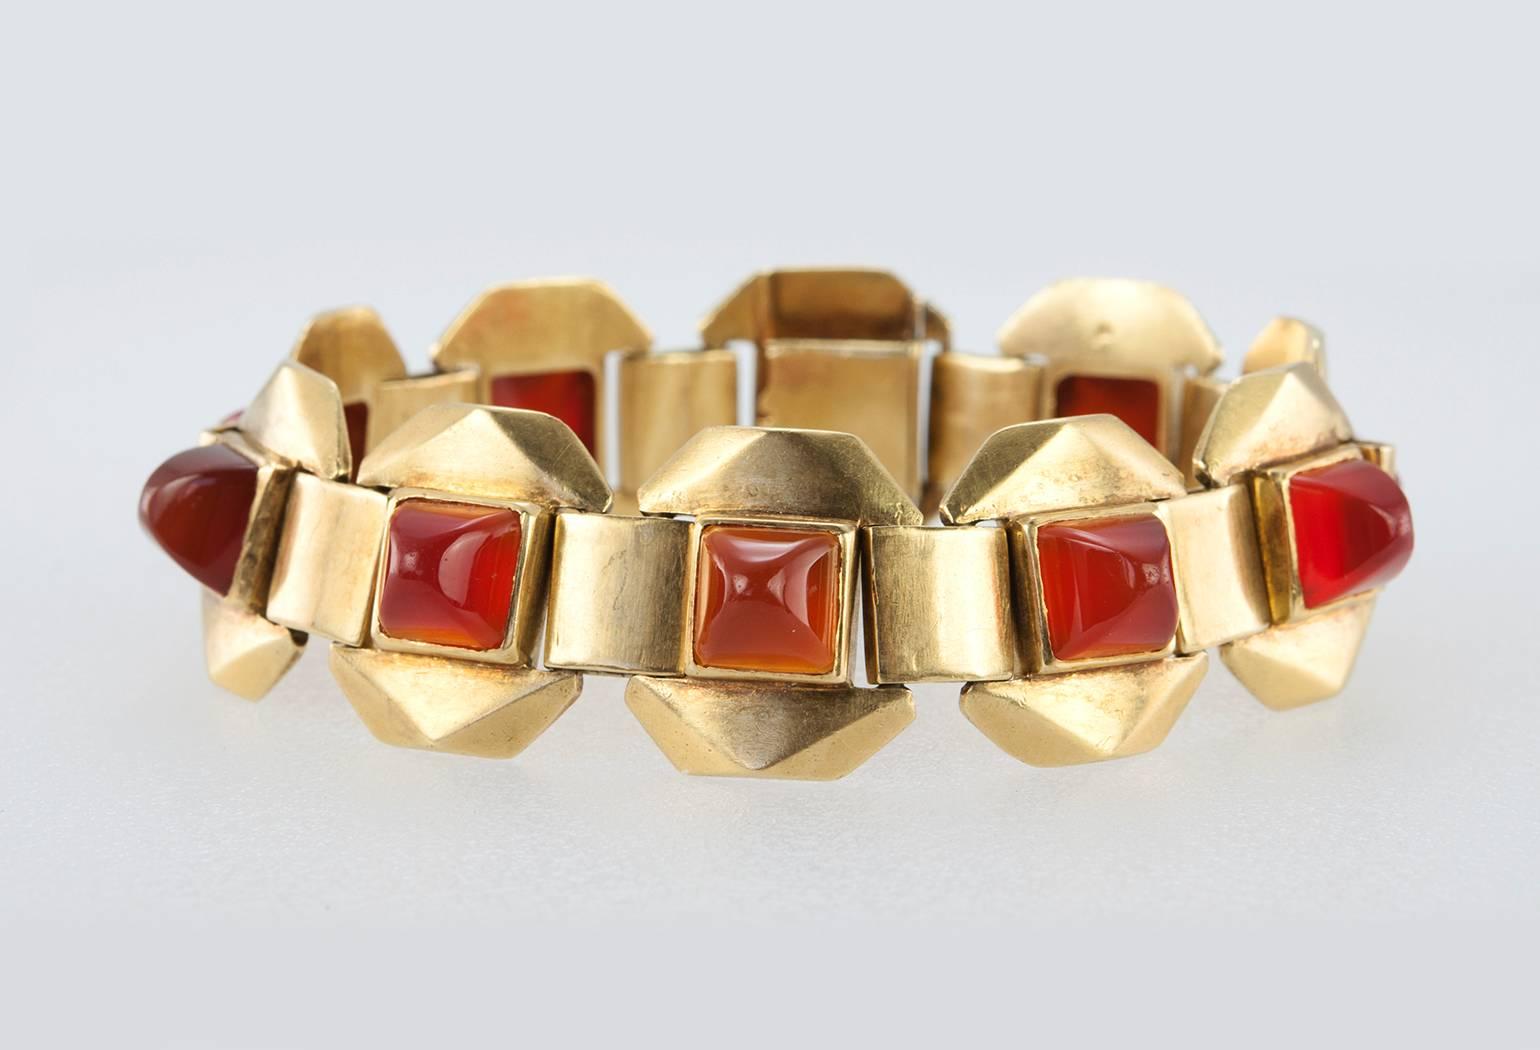 Ghiso carnelian link bracelet in 18 karat yellow gold.  This very cool geometric bracelet features 10 carnelian cabochons cut in the sugar-loaf shape.  Circa 1940s. French hallmarks.

The bracelet measures approximately 7.75 inches in length, 7.5